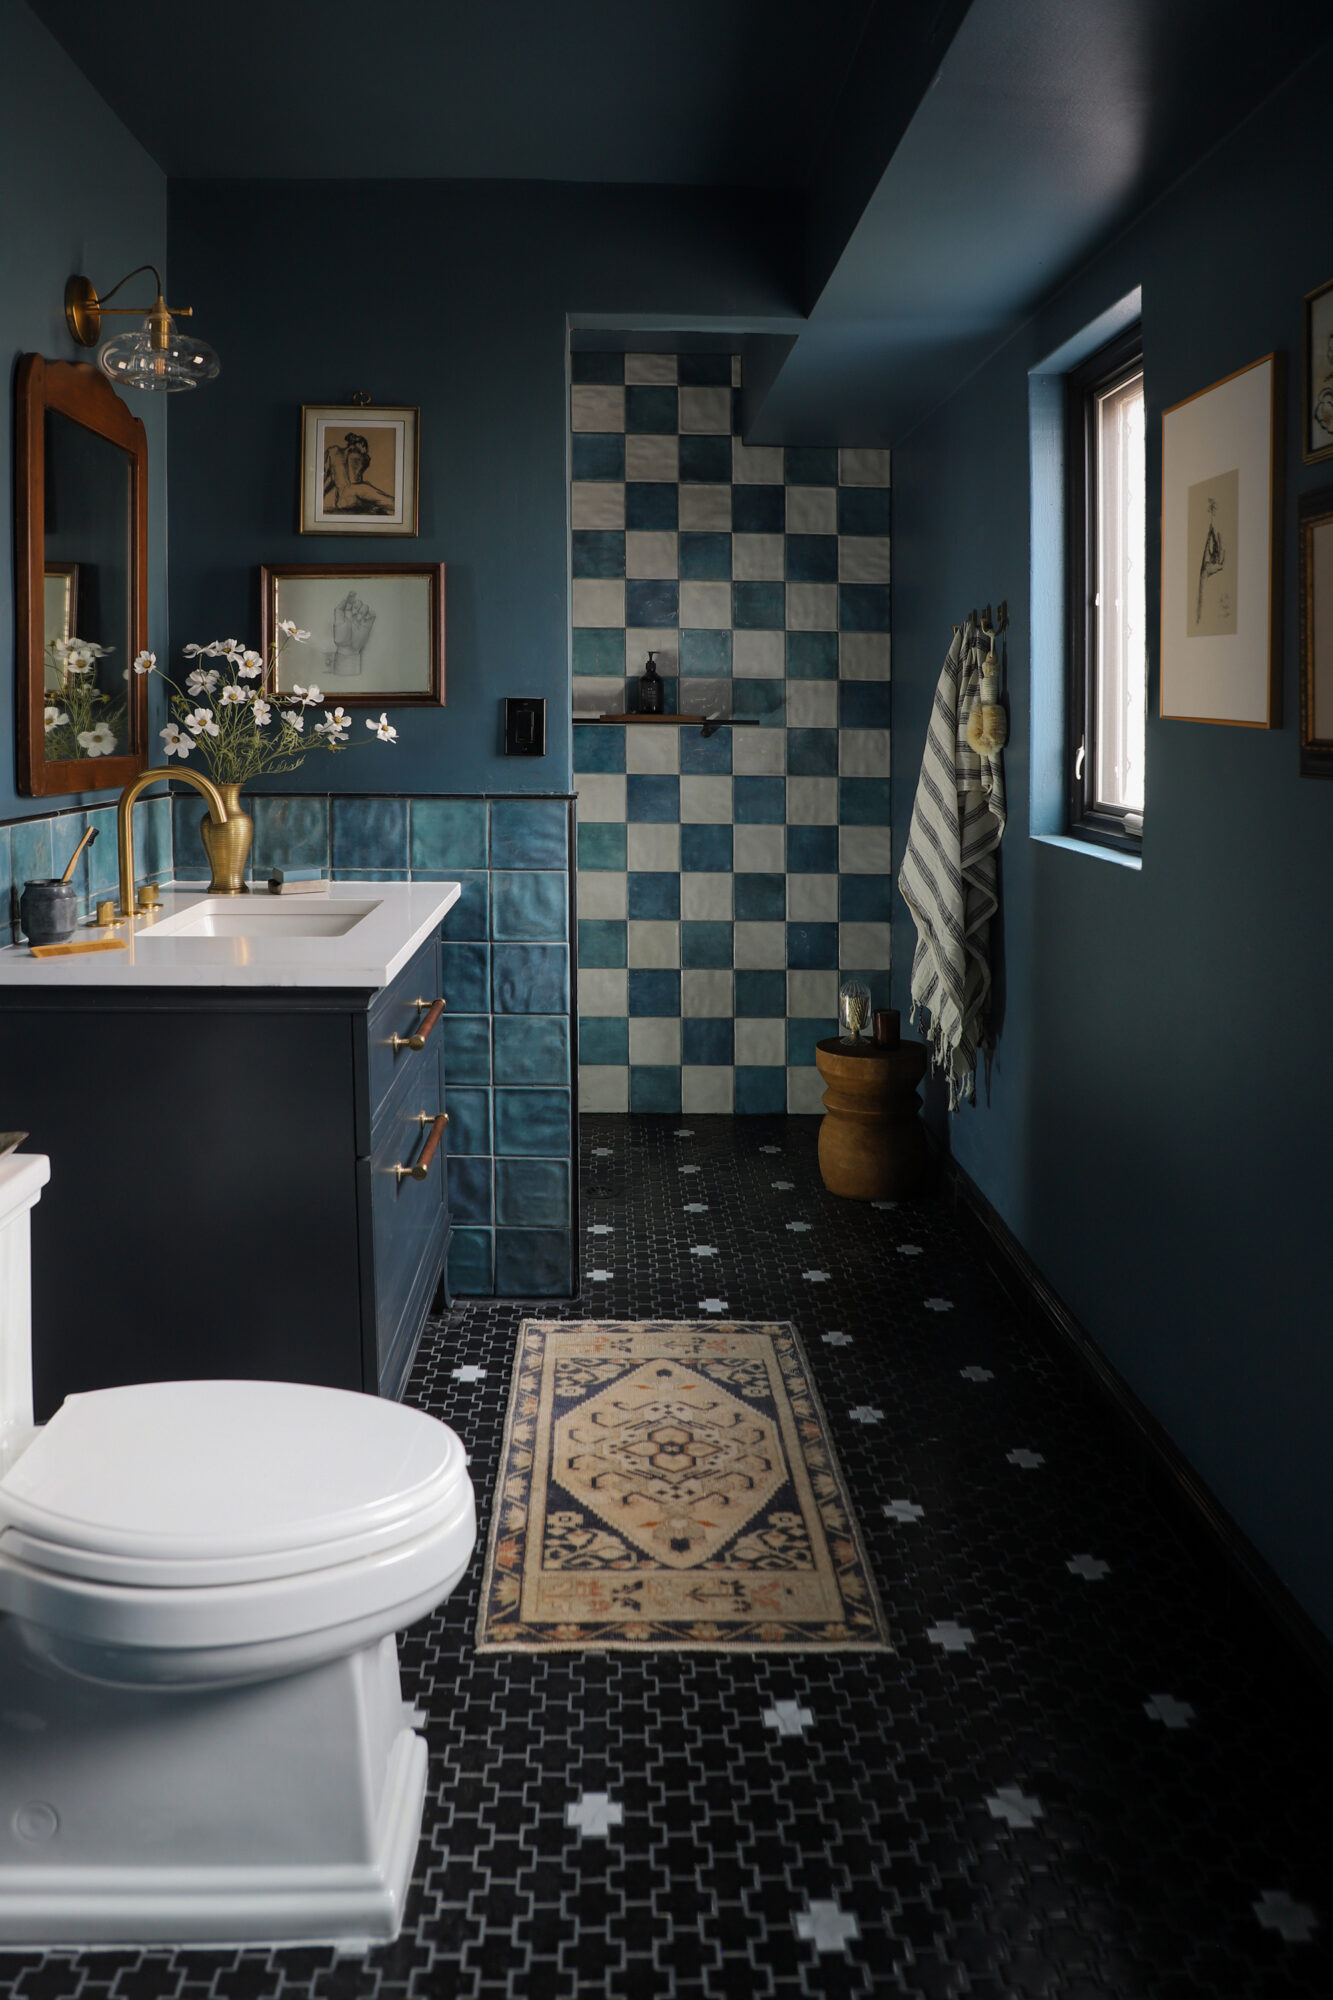 Bathroom with walk in shower with lots of creative tile patterns on the floor and shower wall. Lots of warm blue tones.